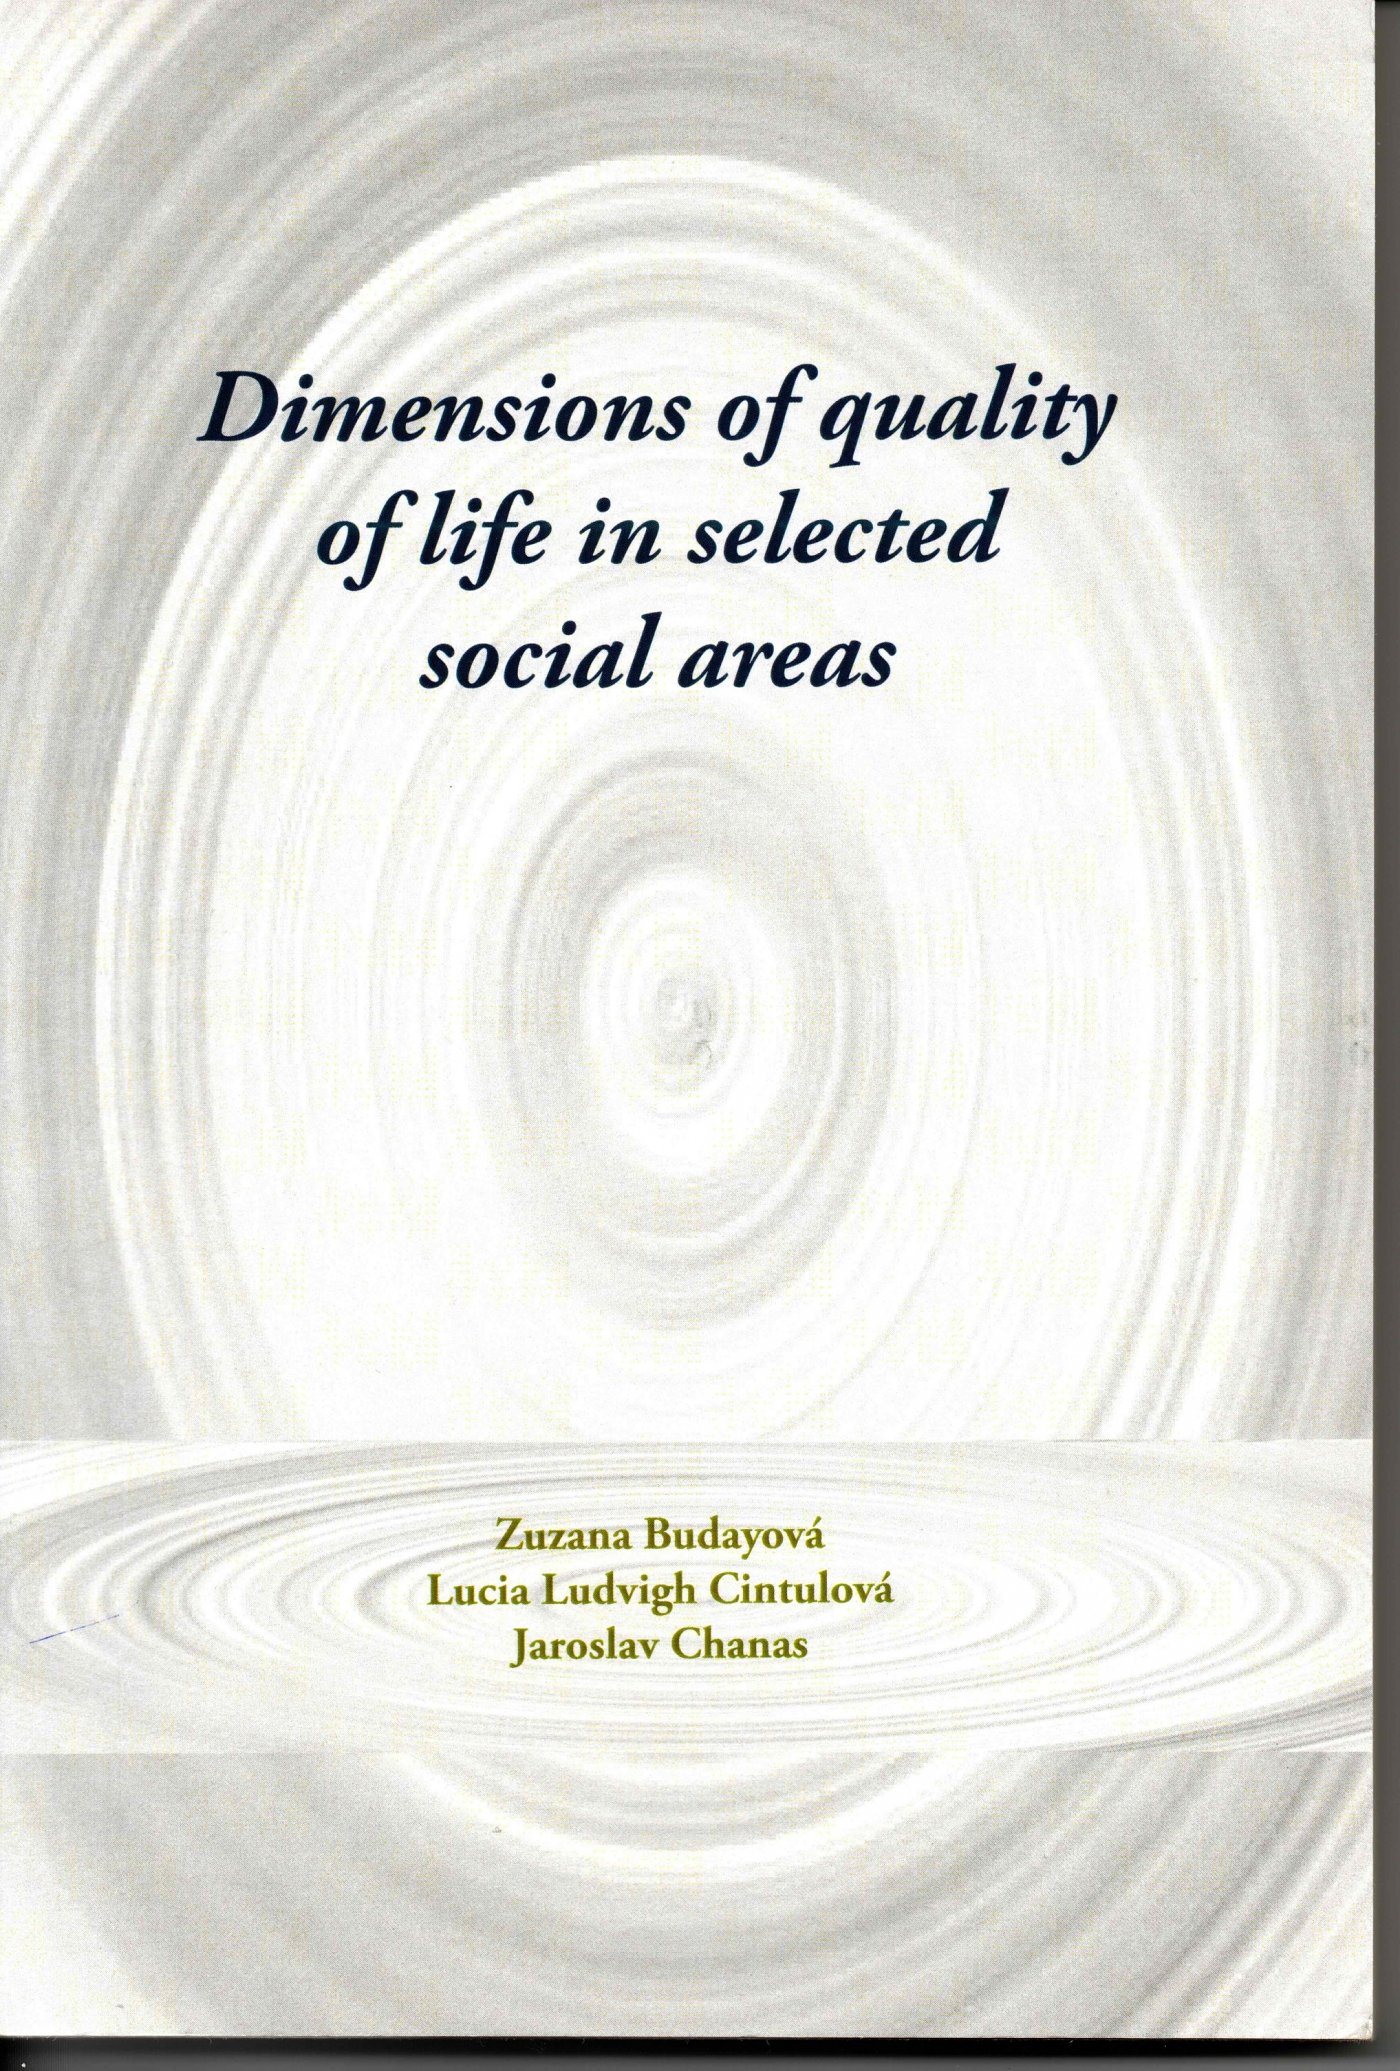 Dimensions of quality of life in selected social areas